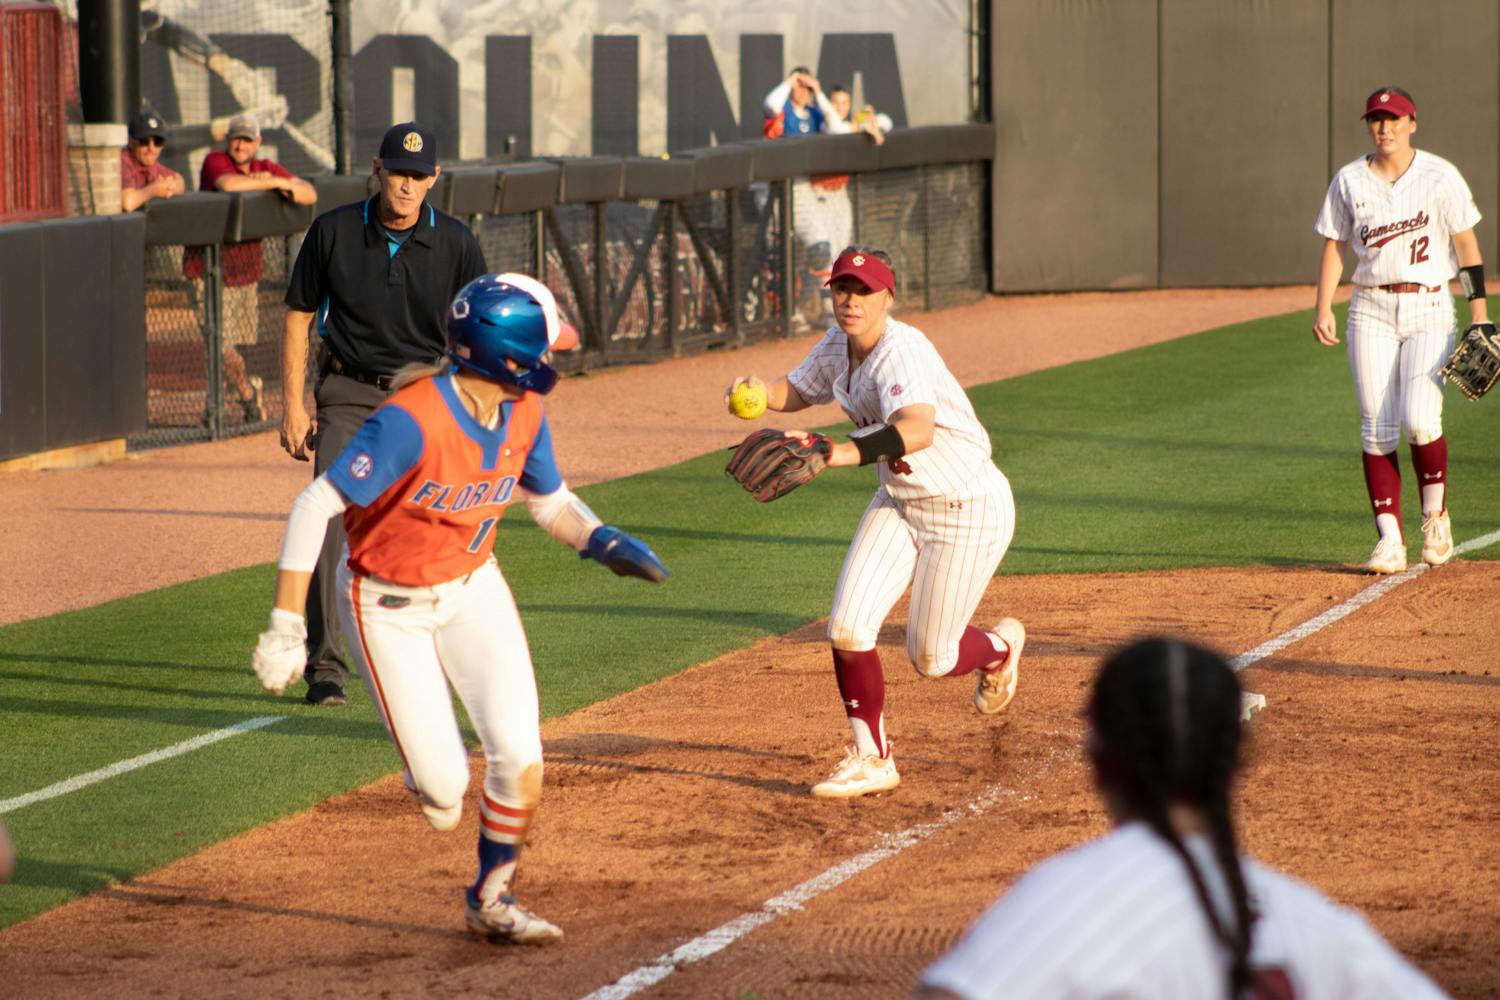 Sophomore infielder Brooke Blankenship runs down a Florida Gator during the game on March 31, 2023, at Beckham Field. The Gamecocks beat the Gators 13-10.